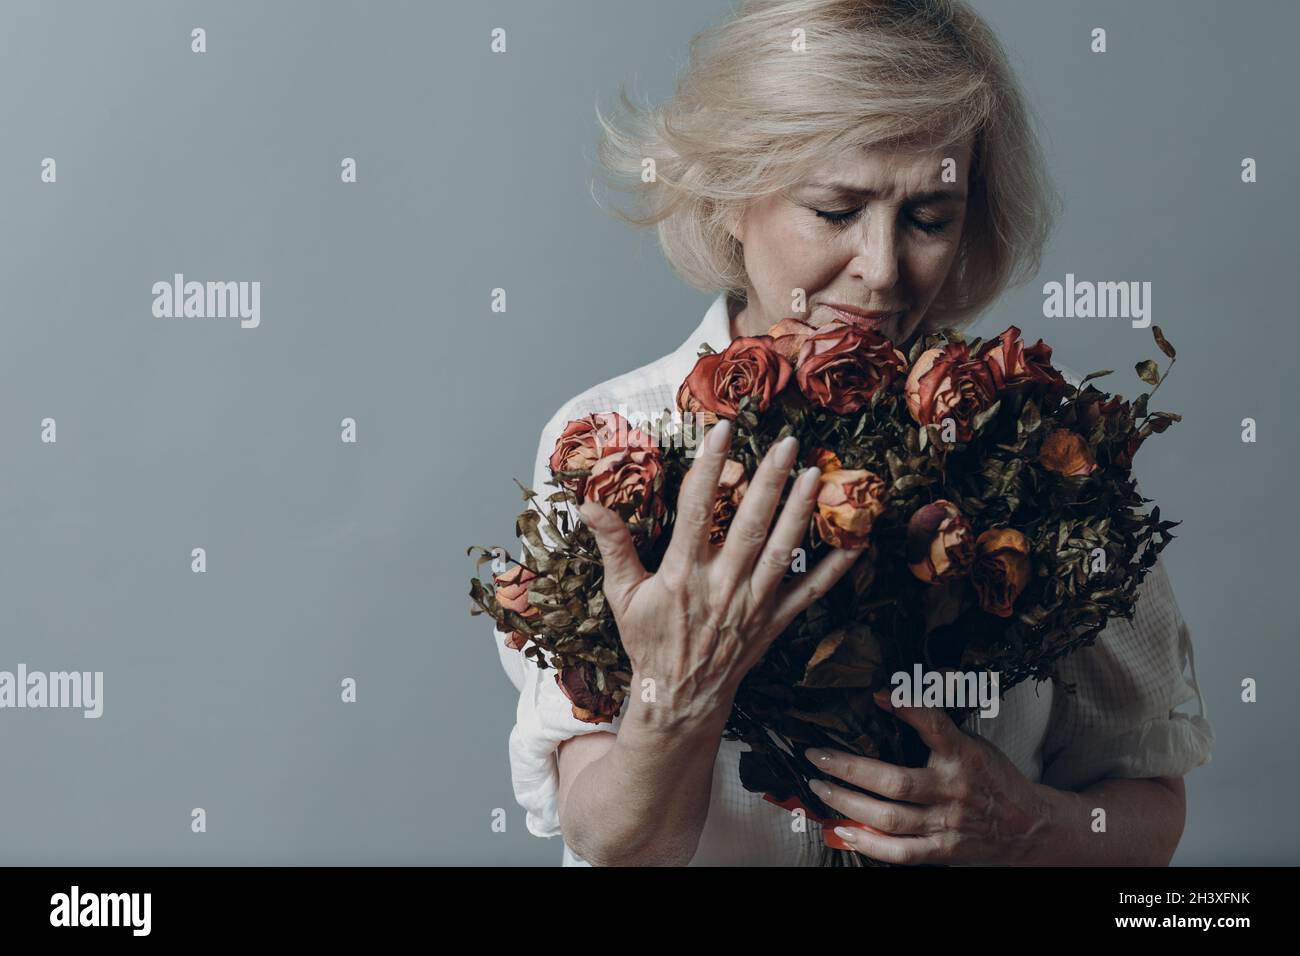 Sad elderly woman touch bouquet of withered roses Stock Photo